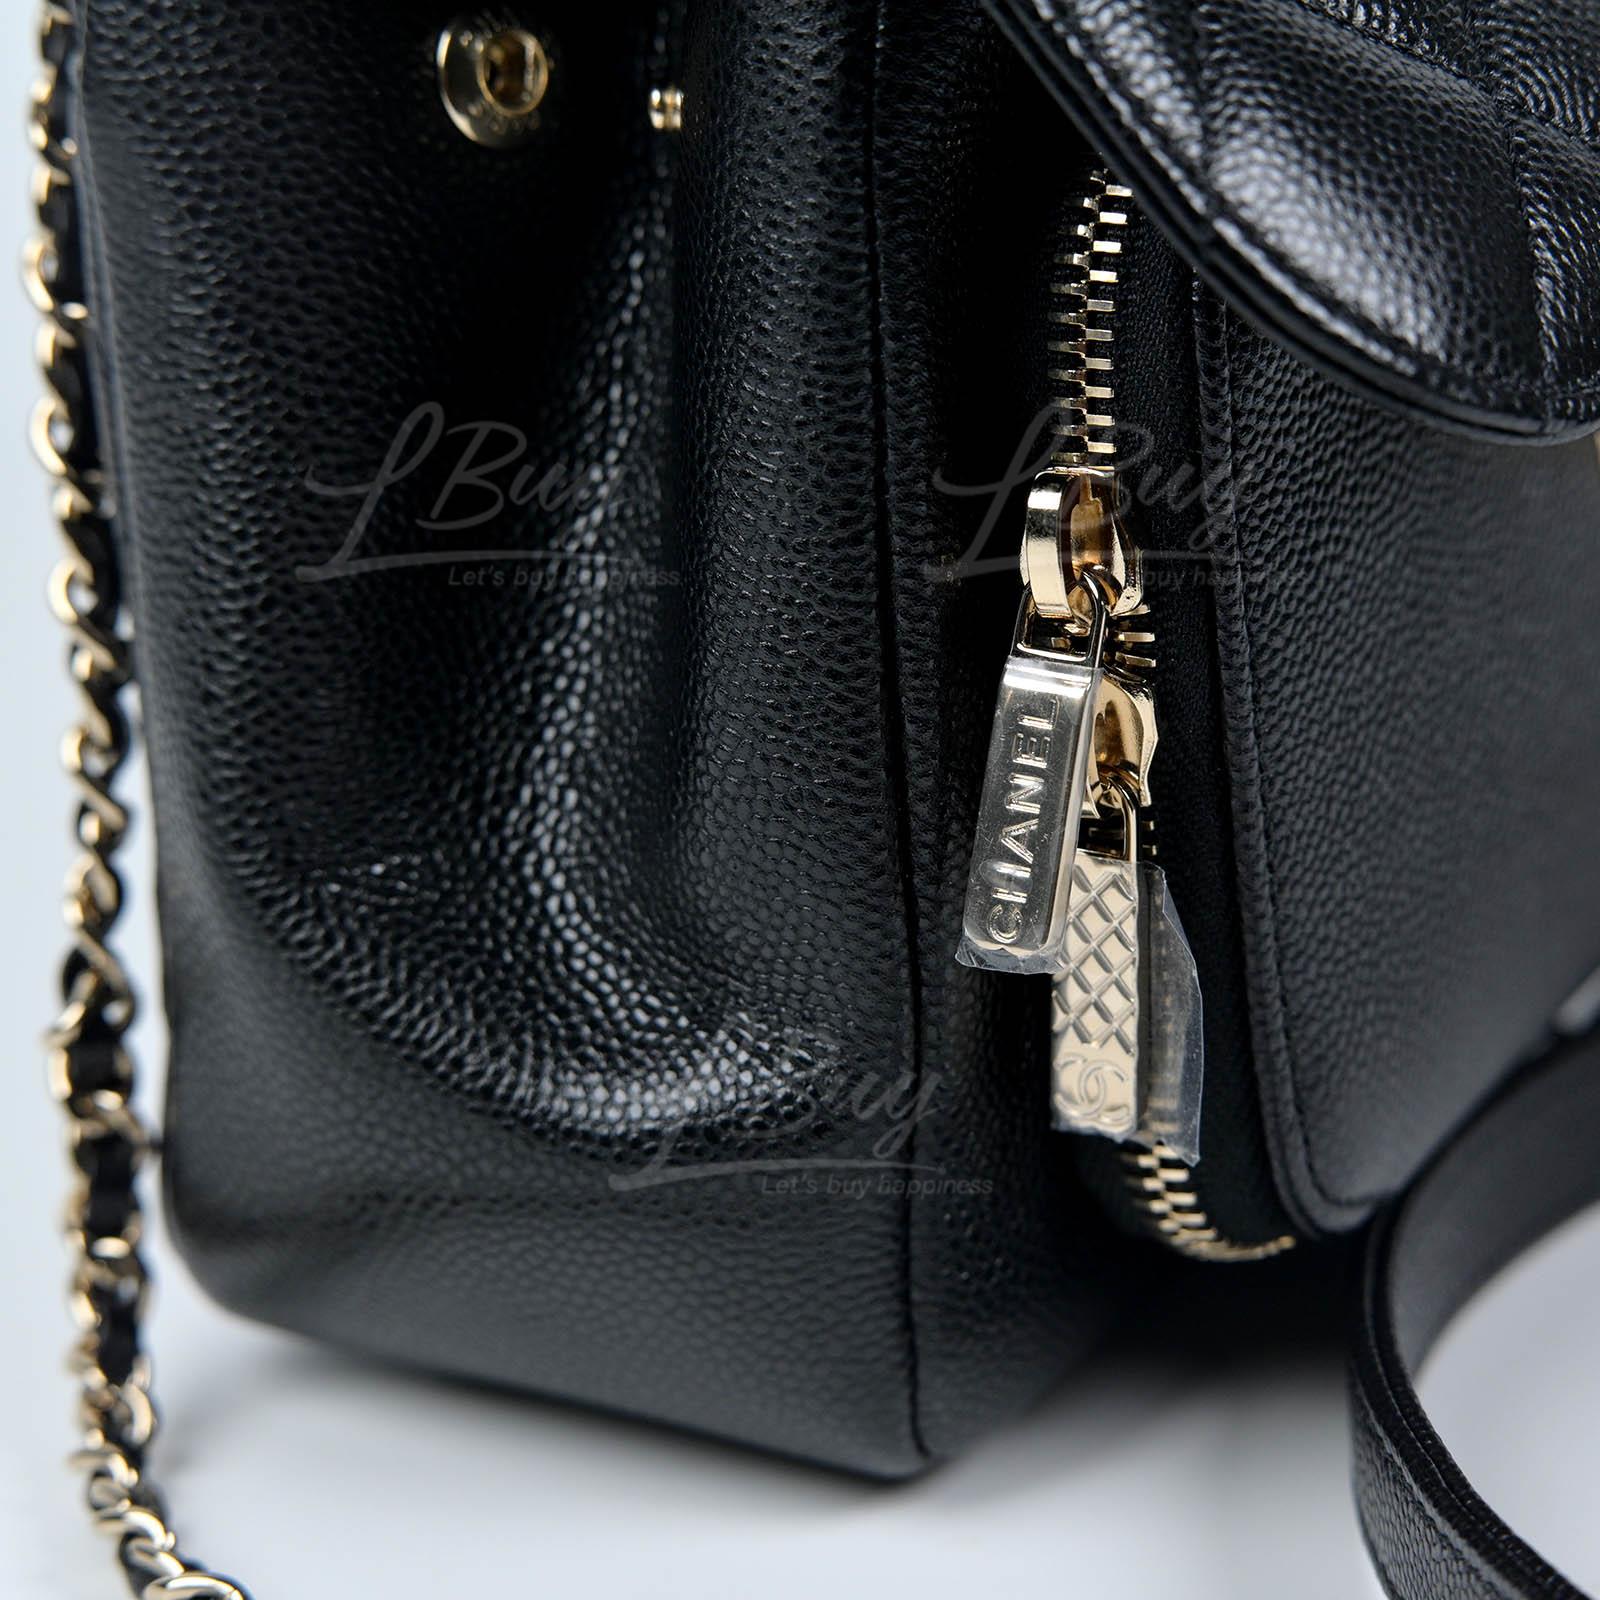 CHANEL-Chanel Affinity Small Size Black Flap Bag